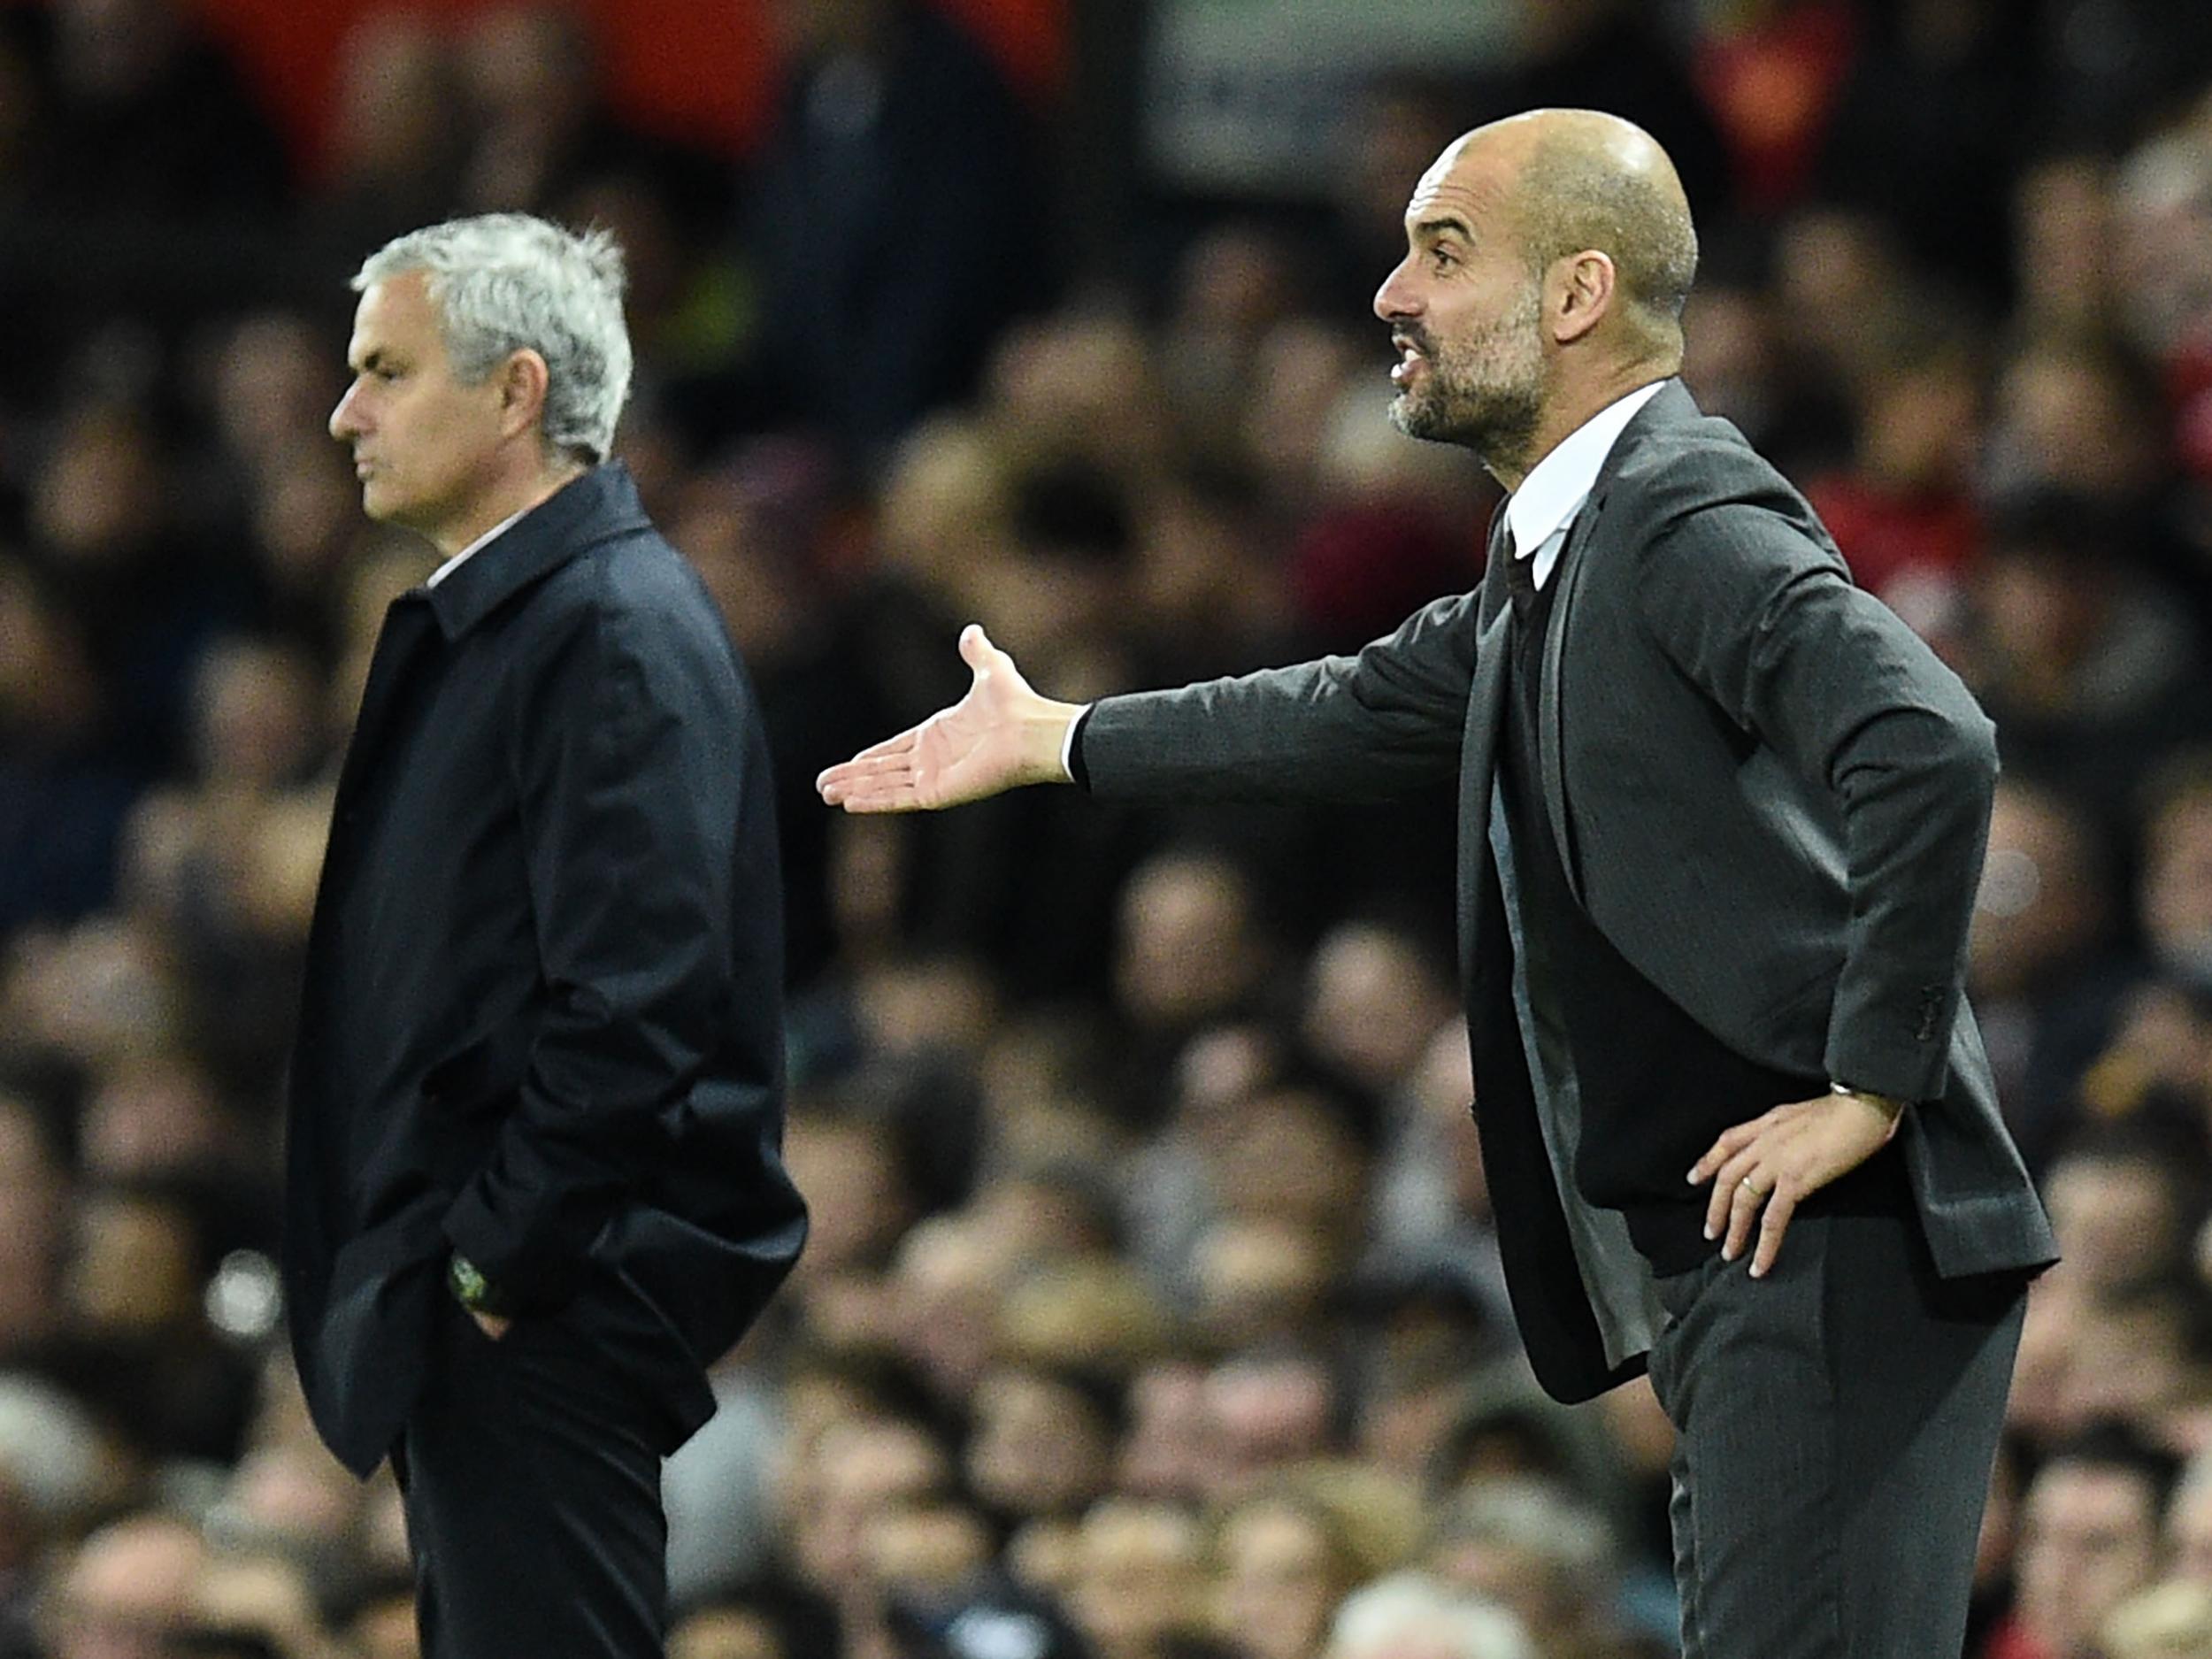 Mourinho and Guardiola are leading the pack with their sides so far